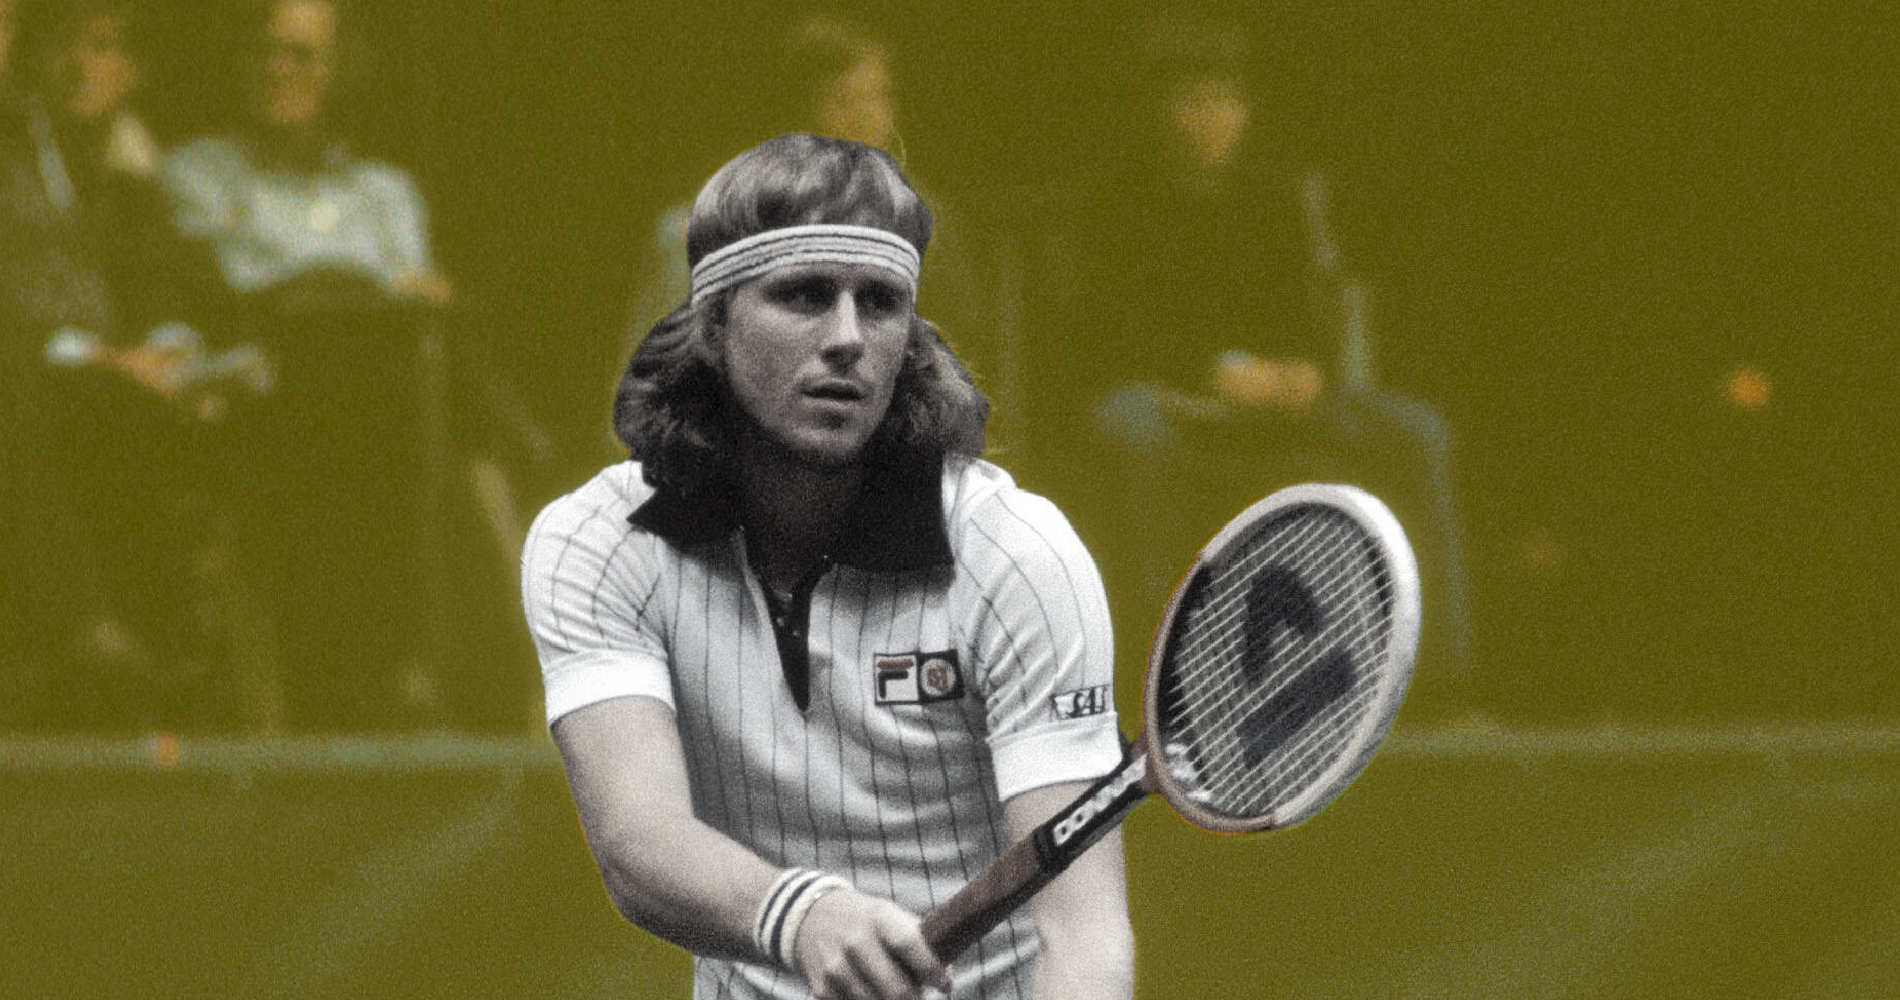 Petulance Creatie Absorberend Tennis: The day Bjorn Borg became world No.1 for the first time